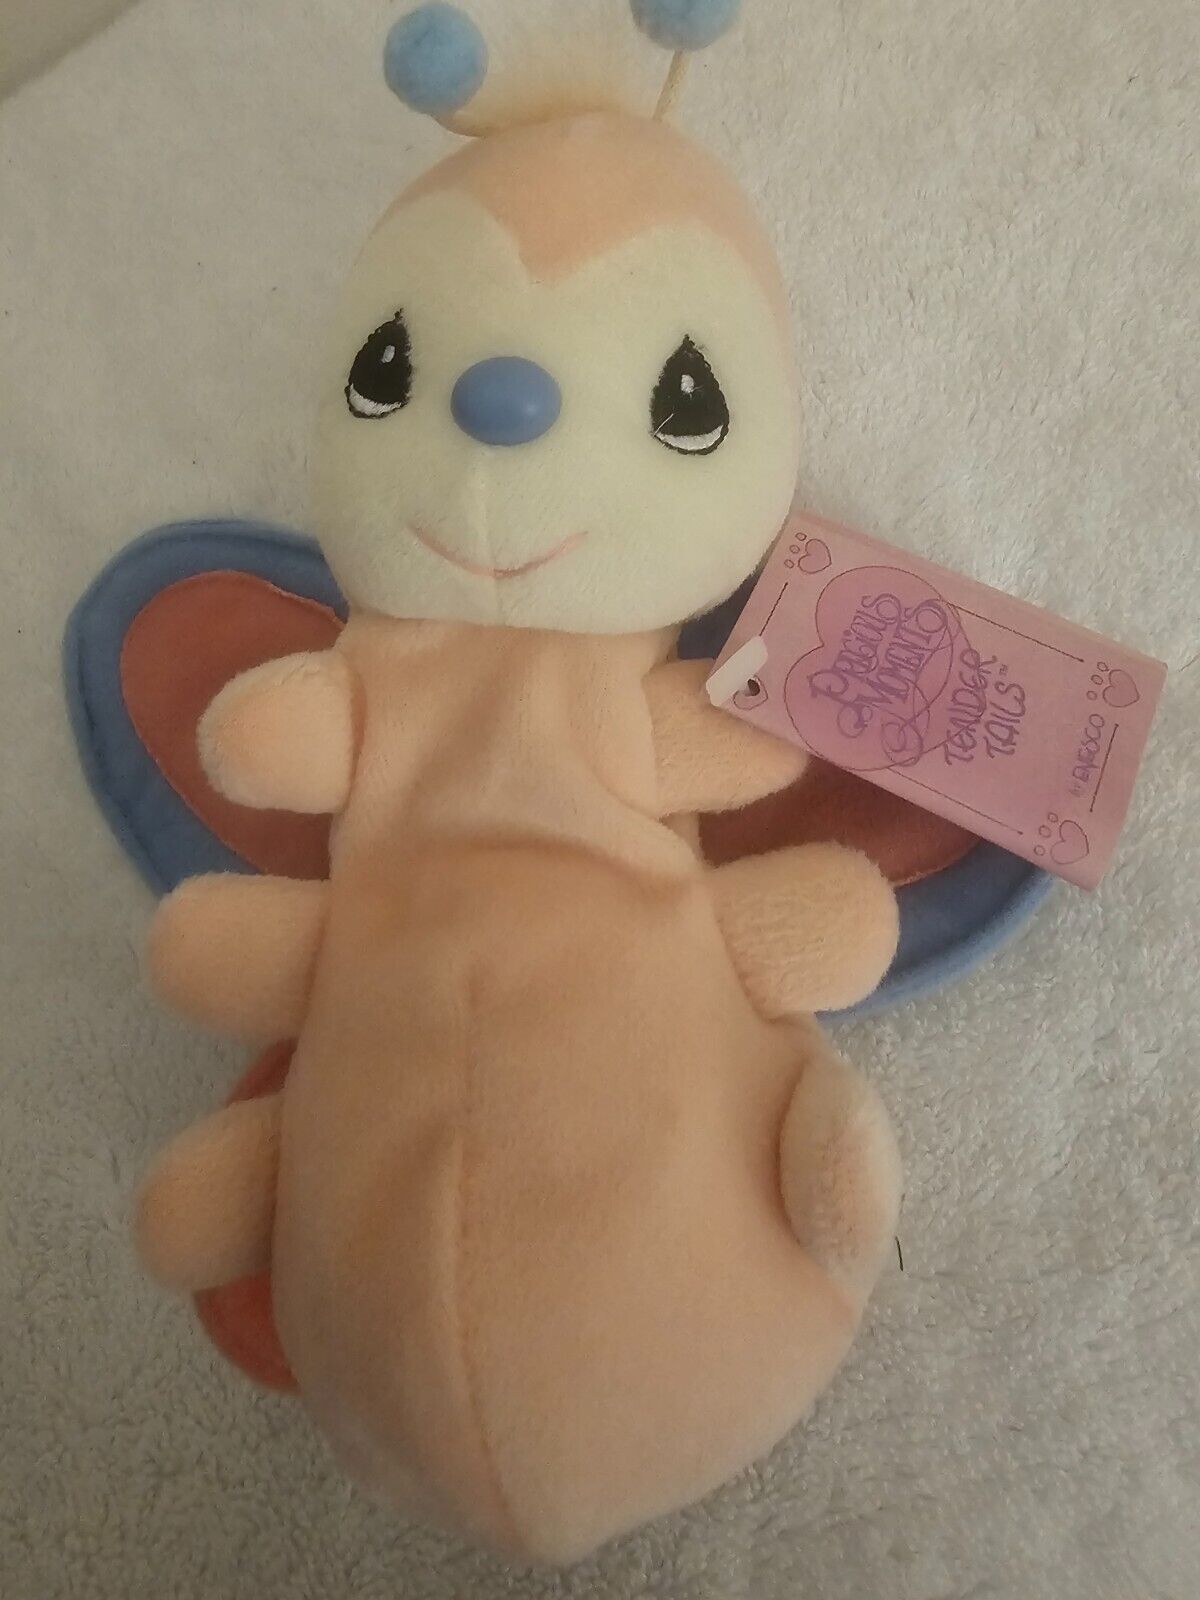 1998 Tender Tails Fairy, I guess, by Precious Moments, Enesco corp.